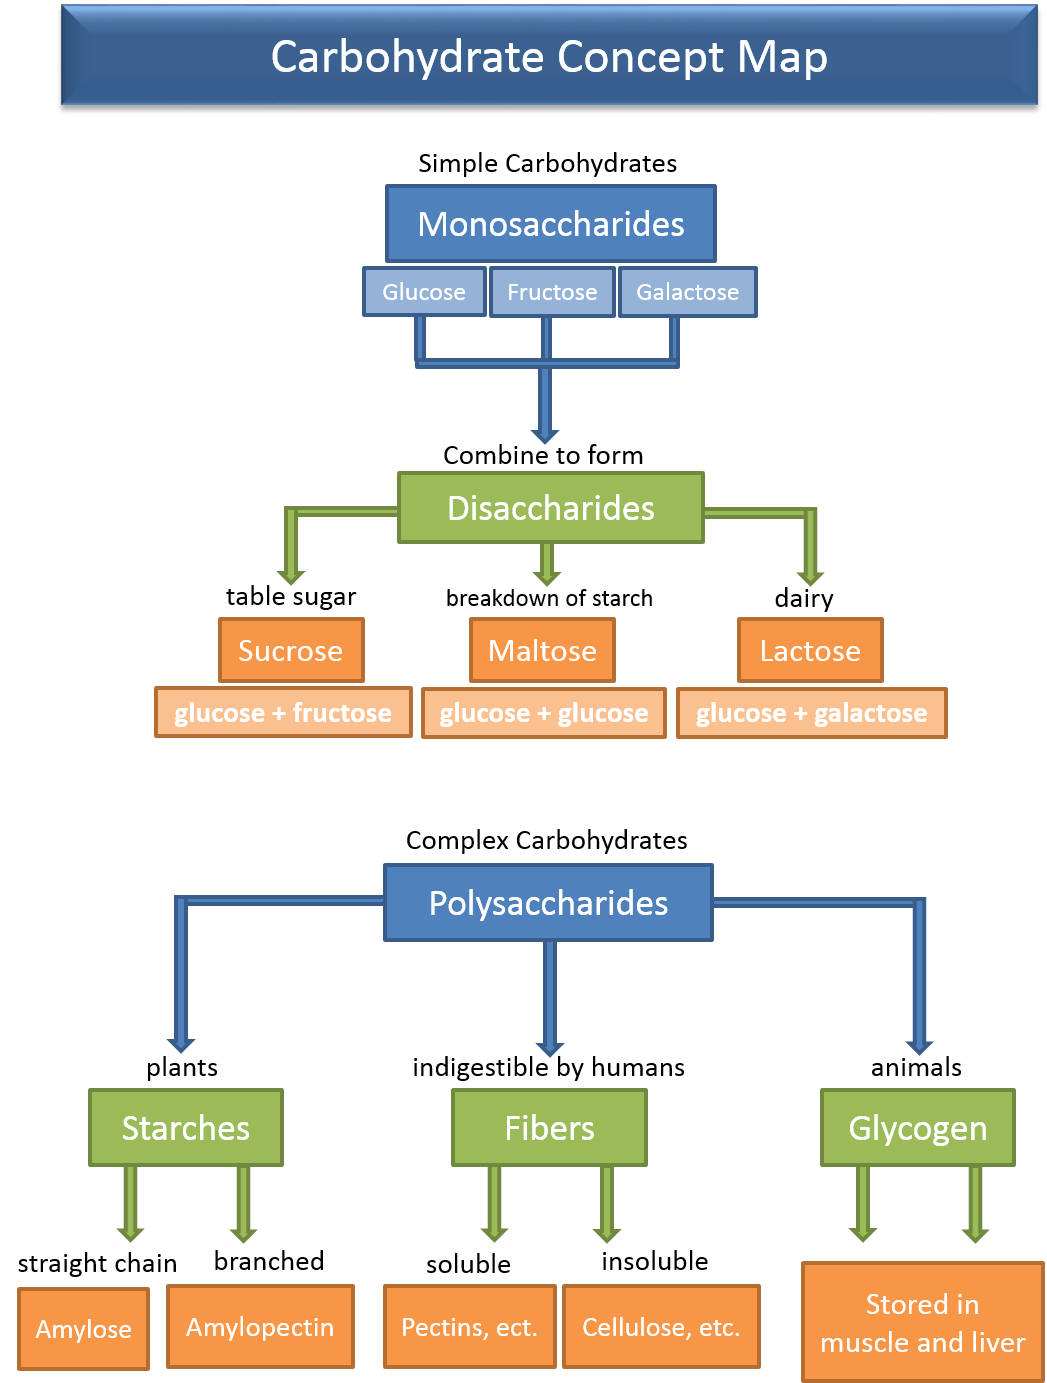 Carbohydrate Concept Map